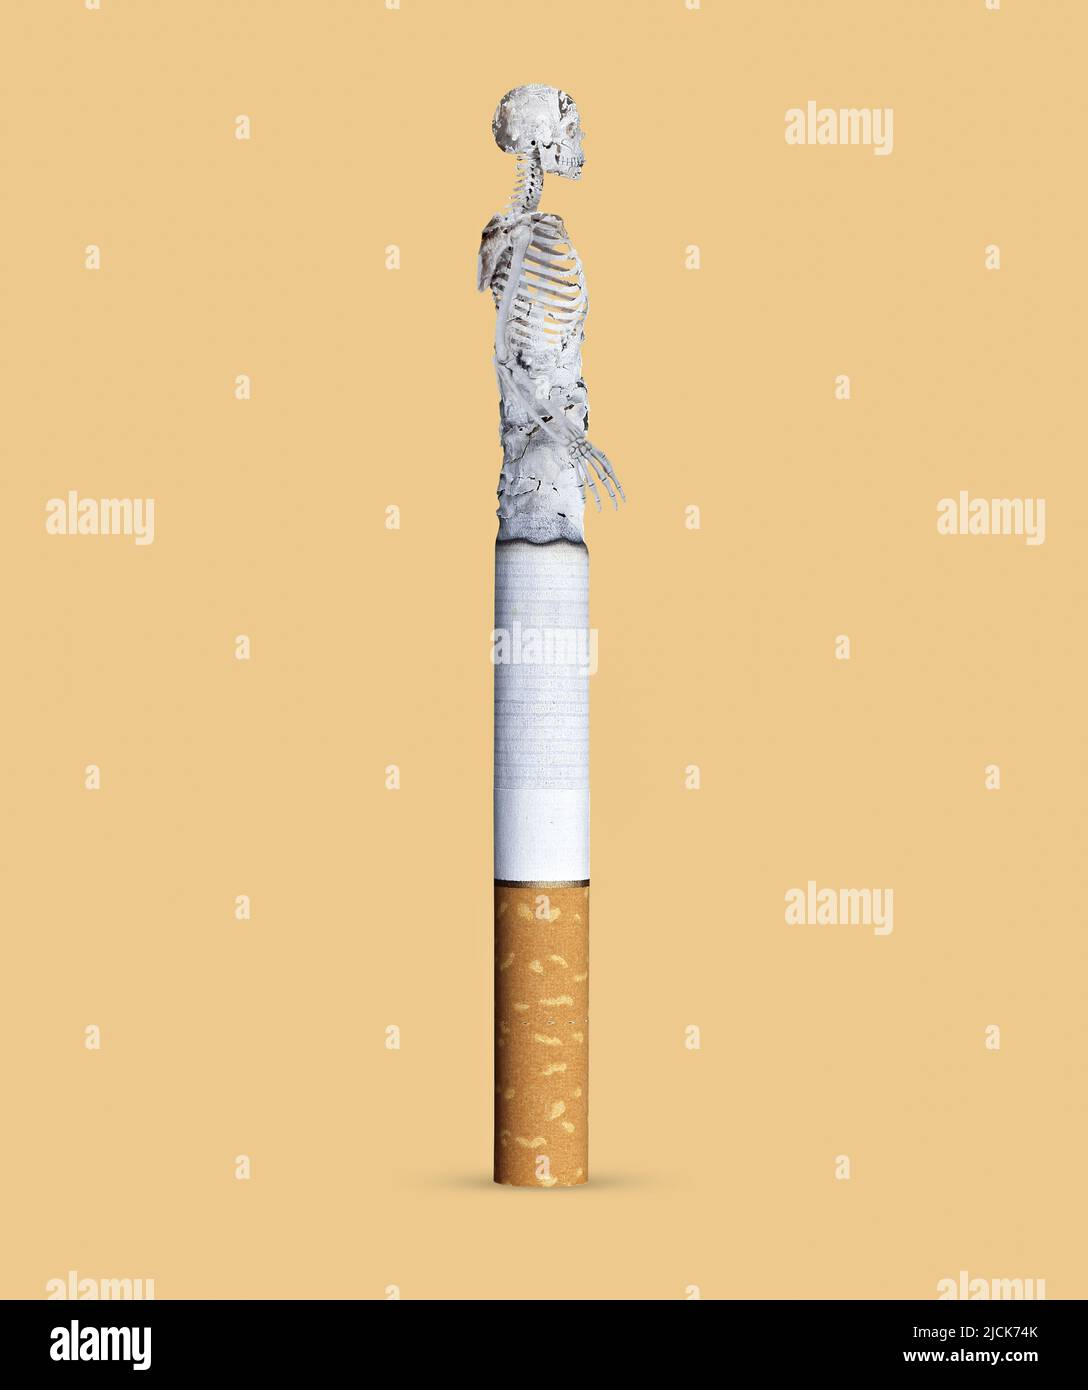 Quit smoking. Smoker death and danger concept. Skeleton in cigarette ash. Yellow background. 3d illustration. Stock Photo